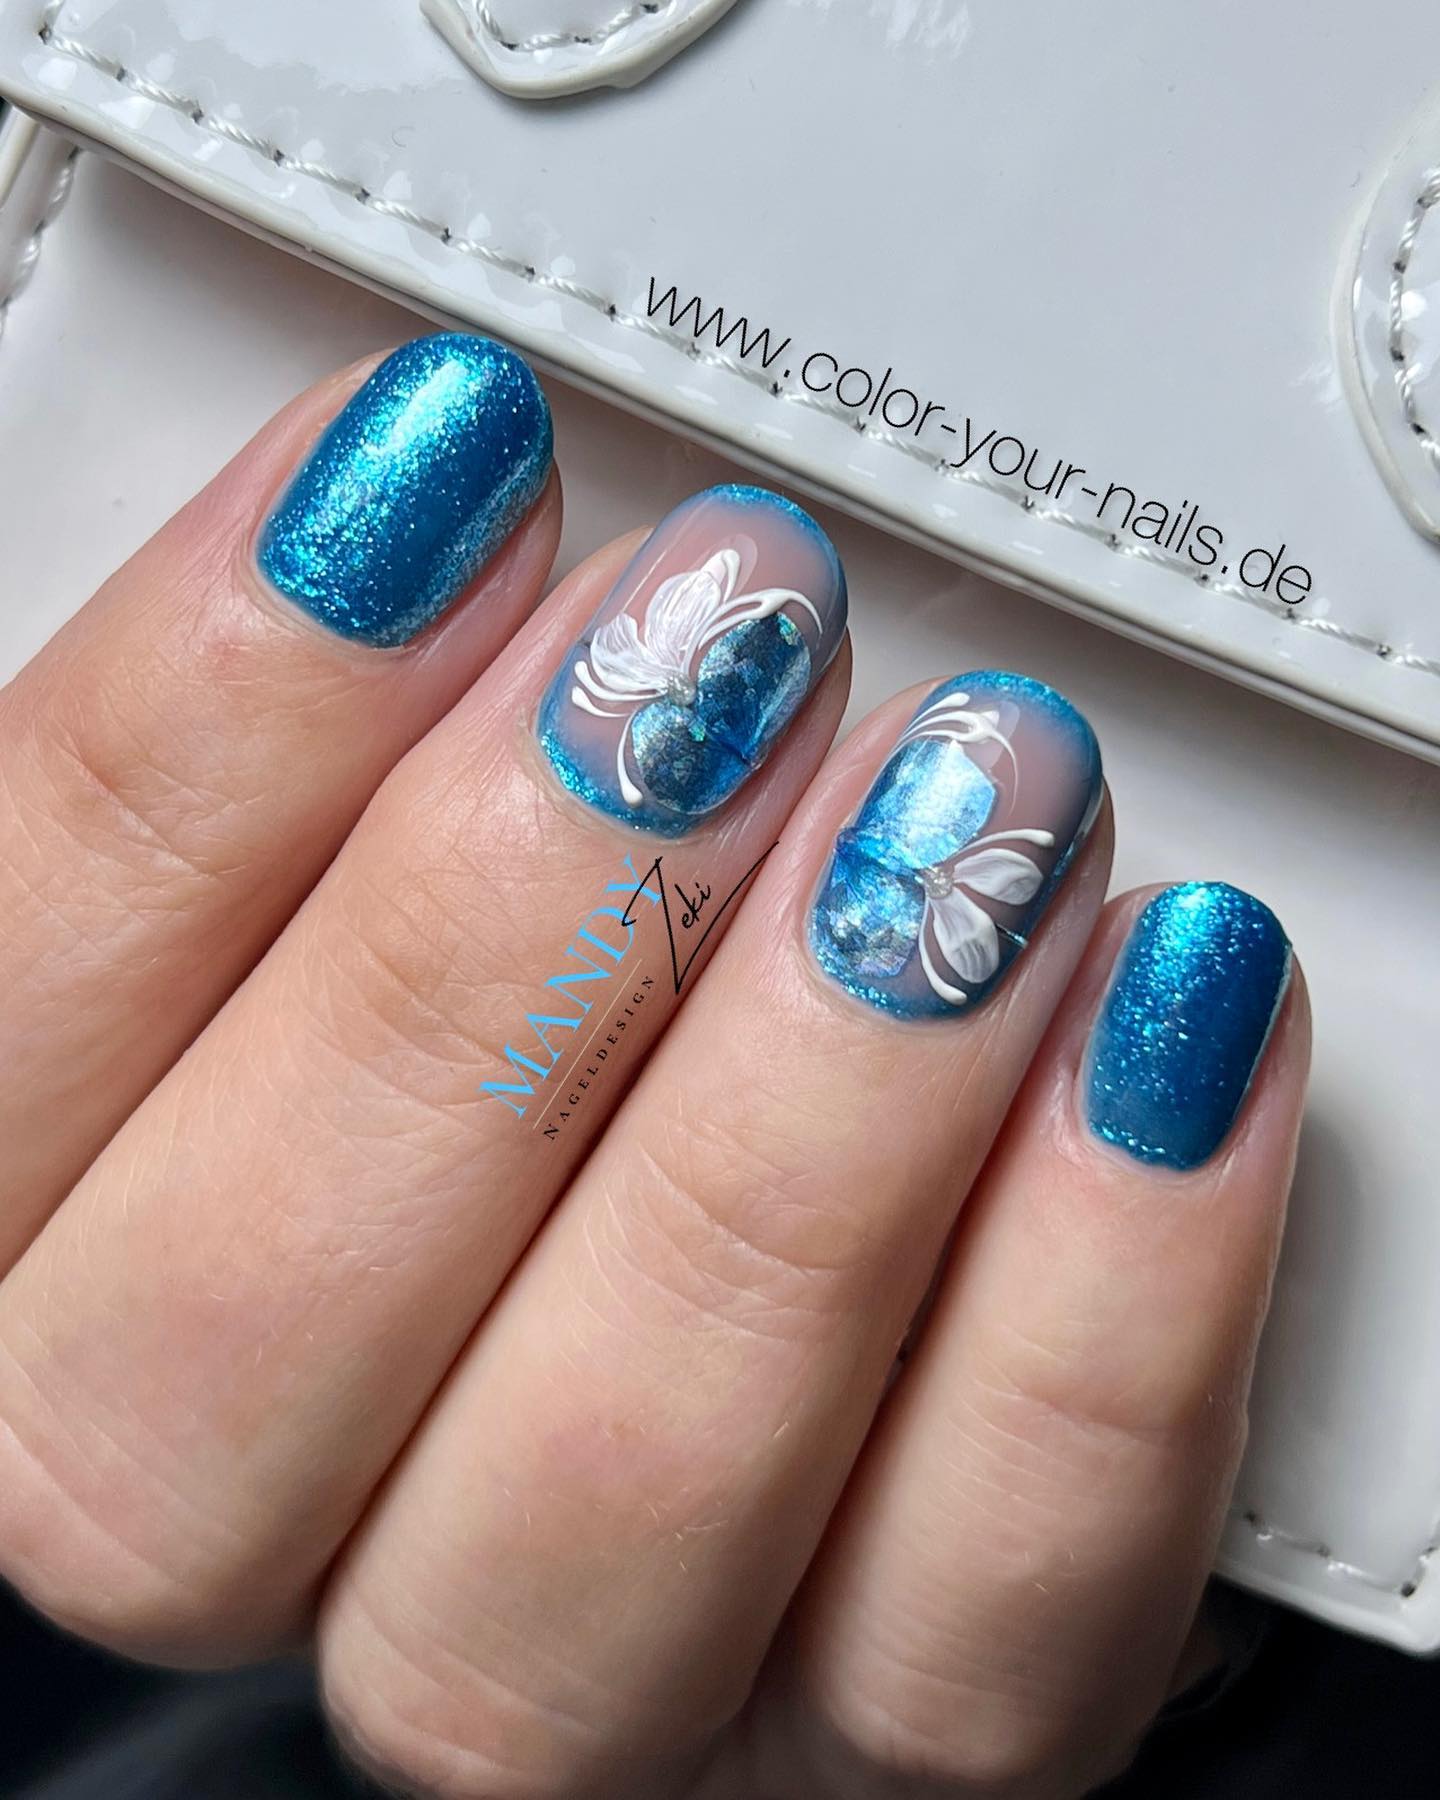 Blue glittered nails are always there for you to shine bright like a diamond. To take these nails to a different level, applying a floral nail art for accent nails sounds amazing, doesn't it?